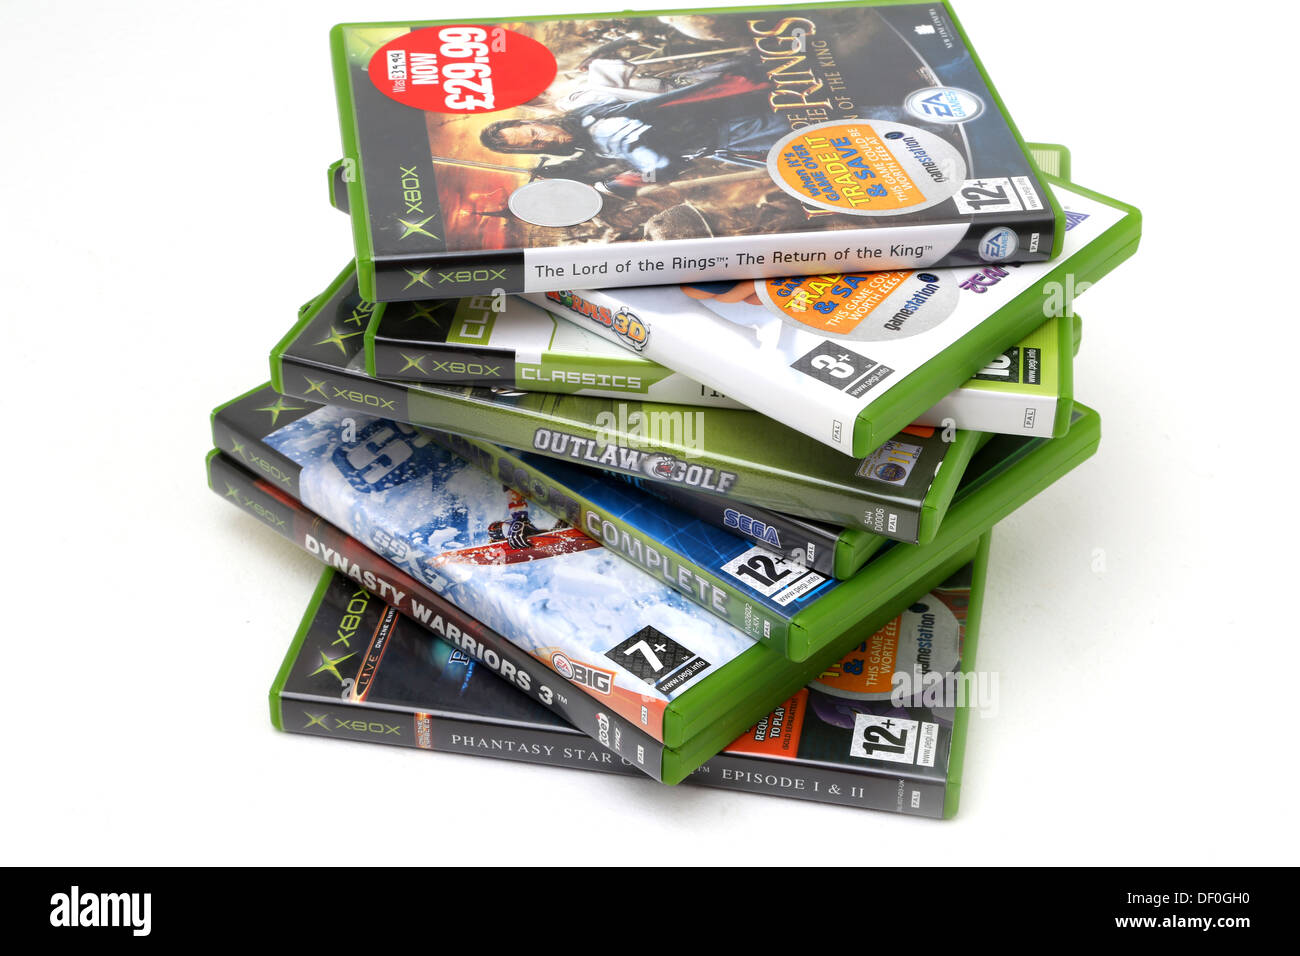 A Pile Of Xbox Games Stock Photo